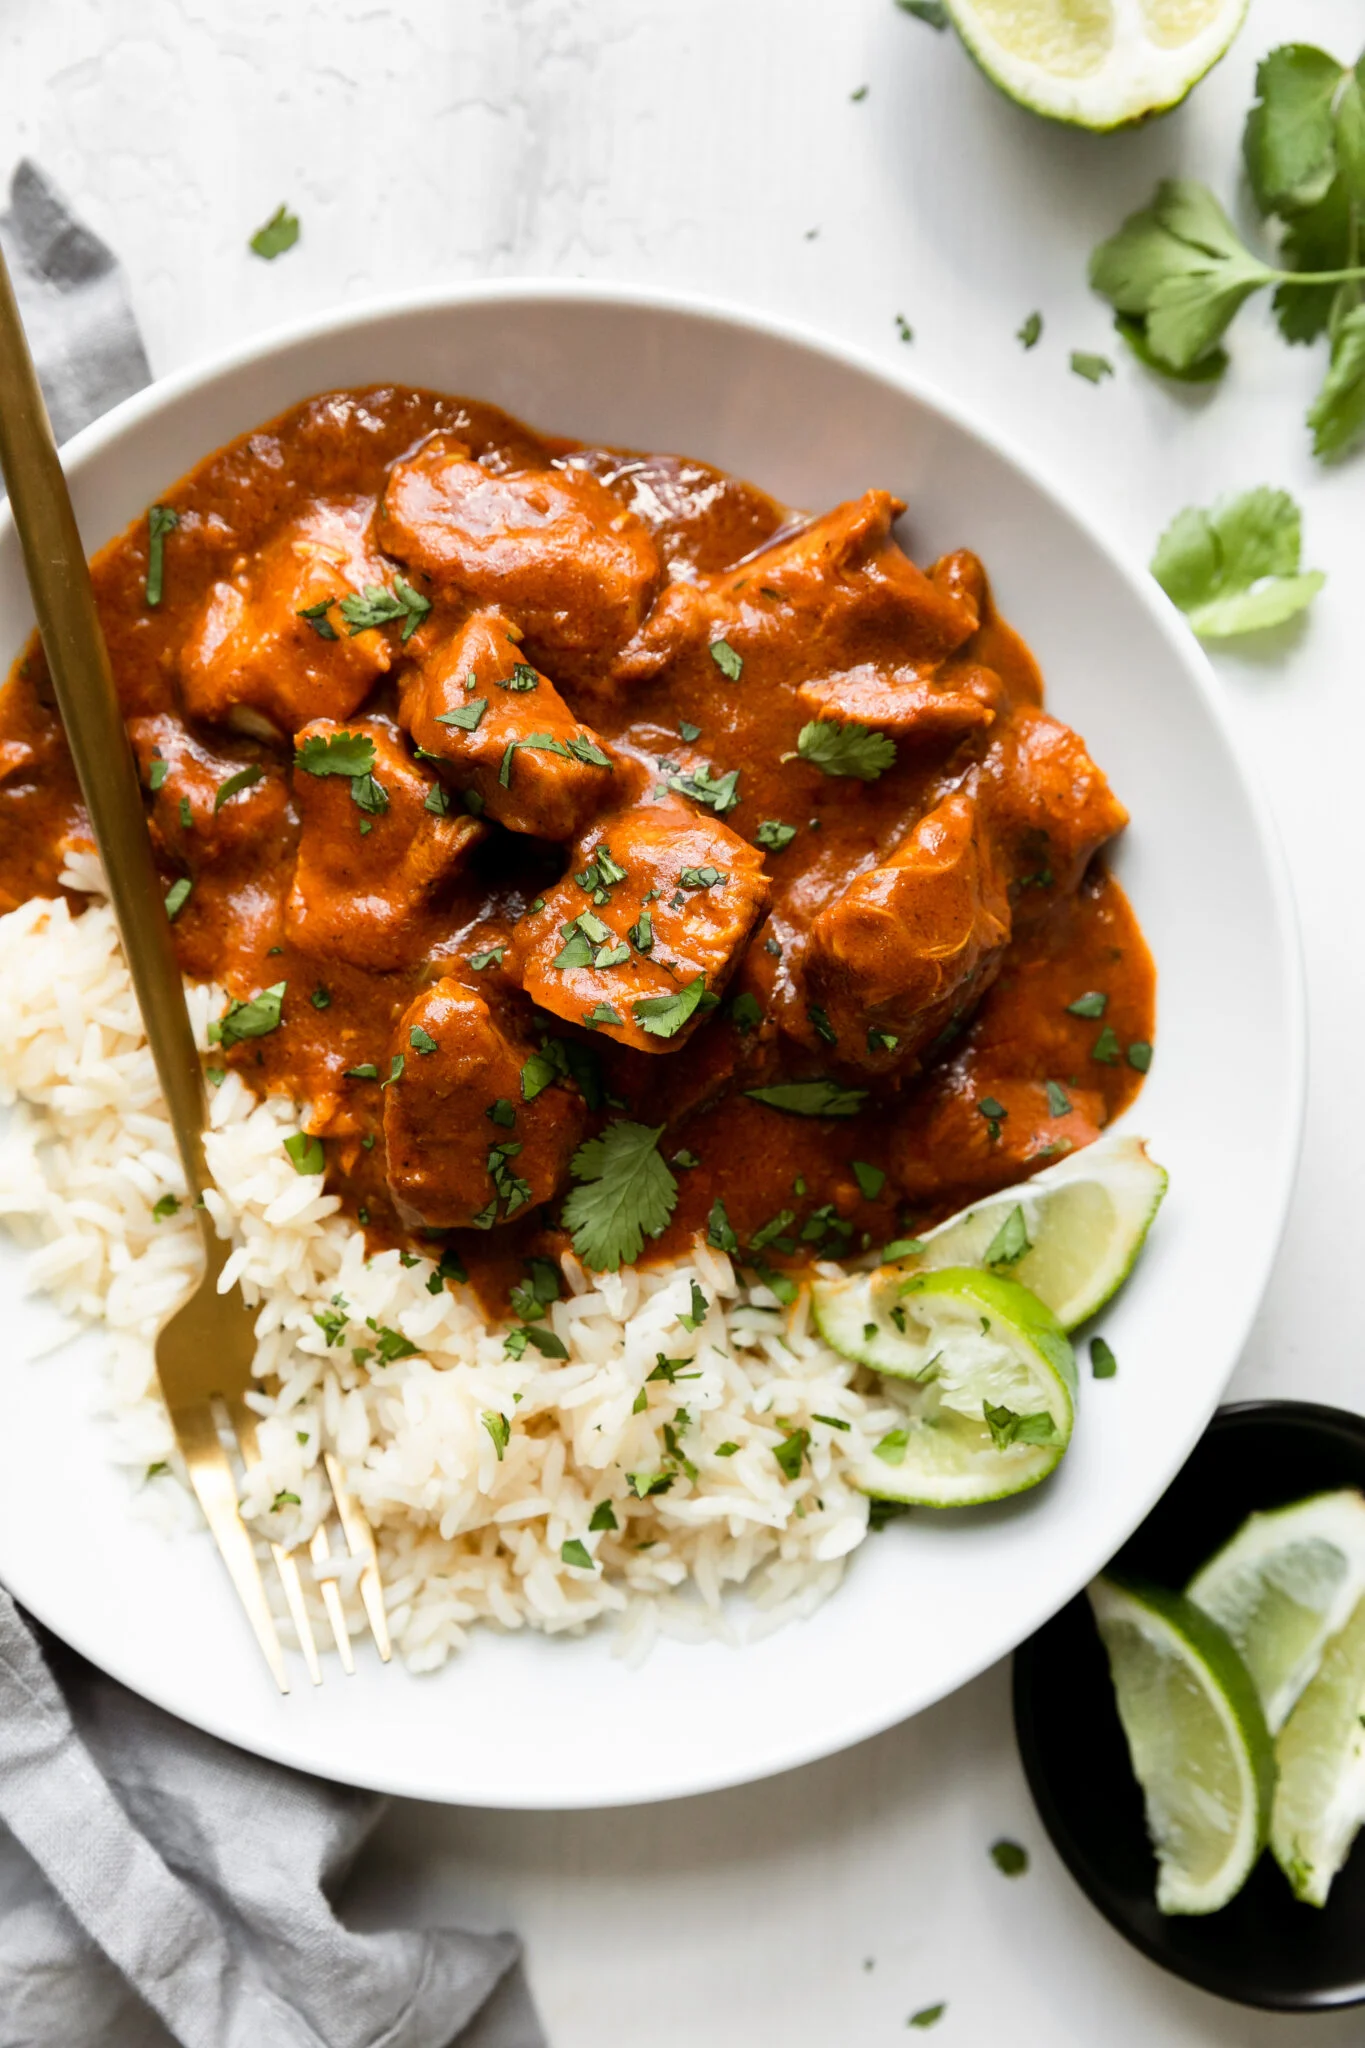 A plate with chicken tikka masala and rice.